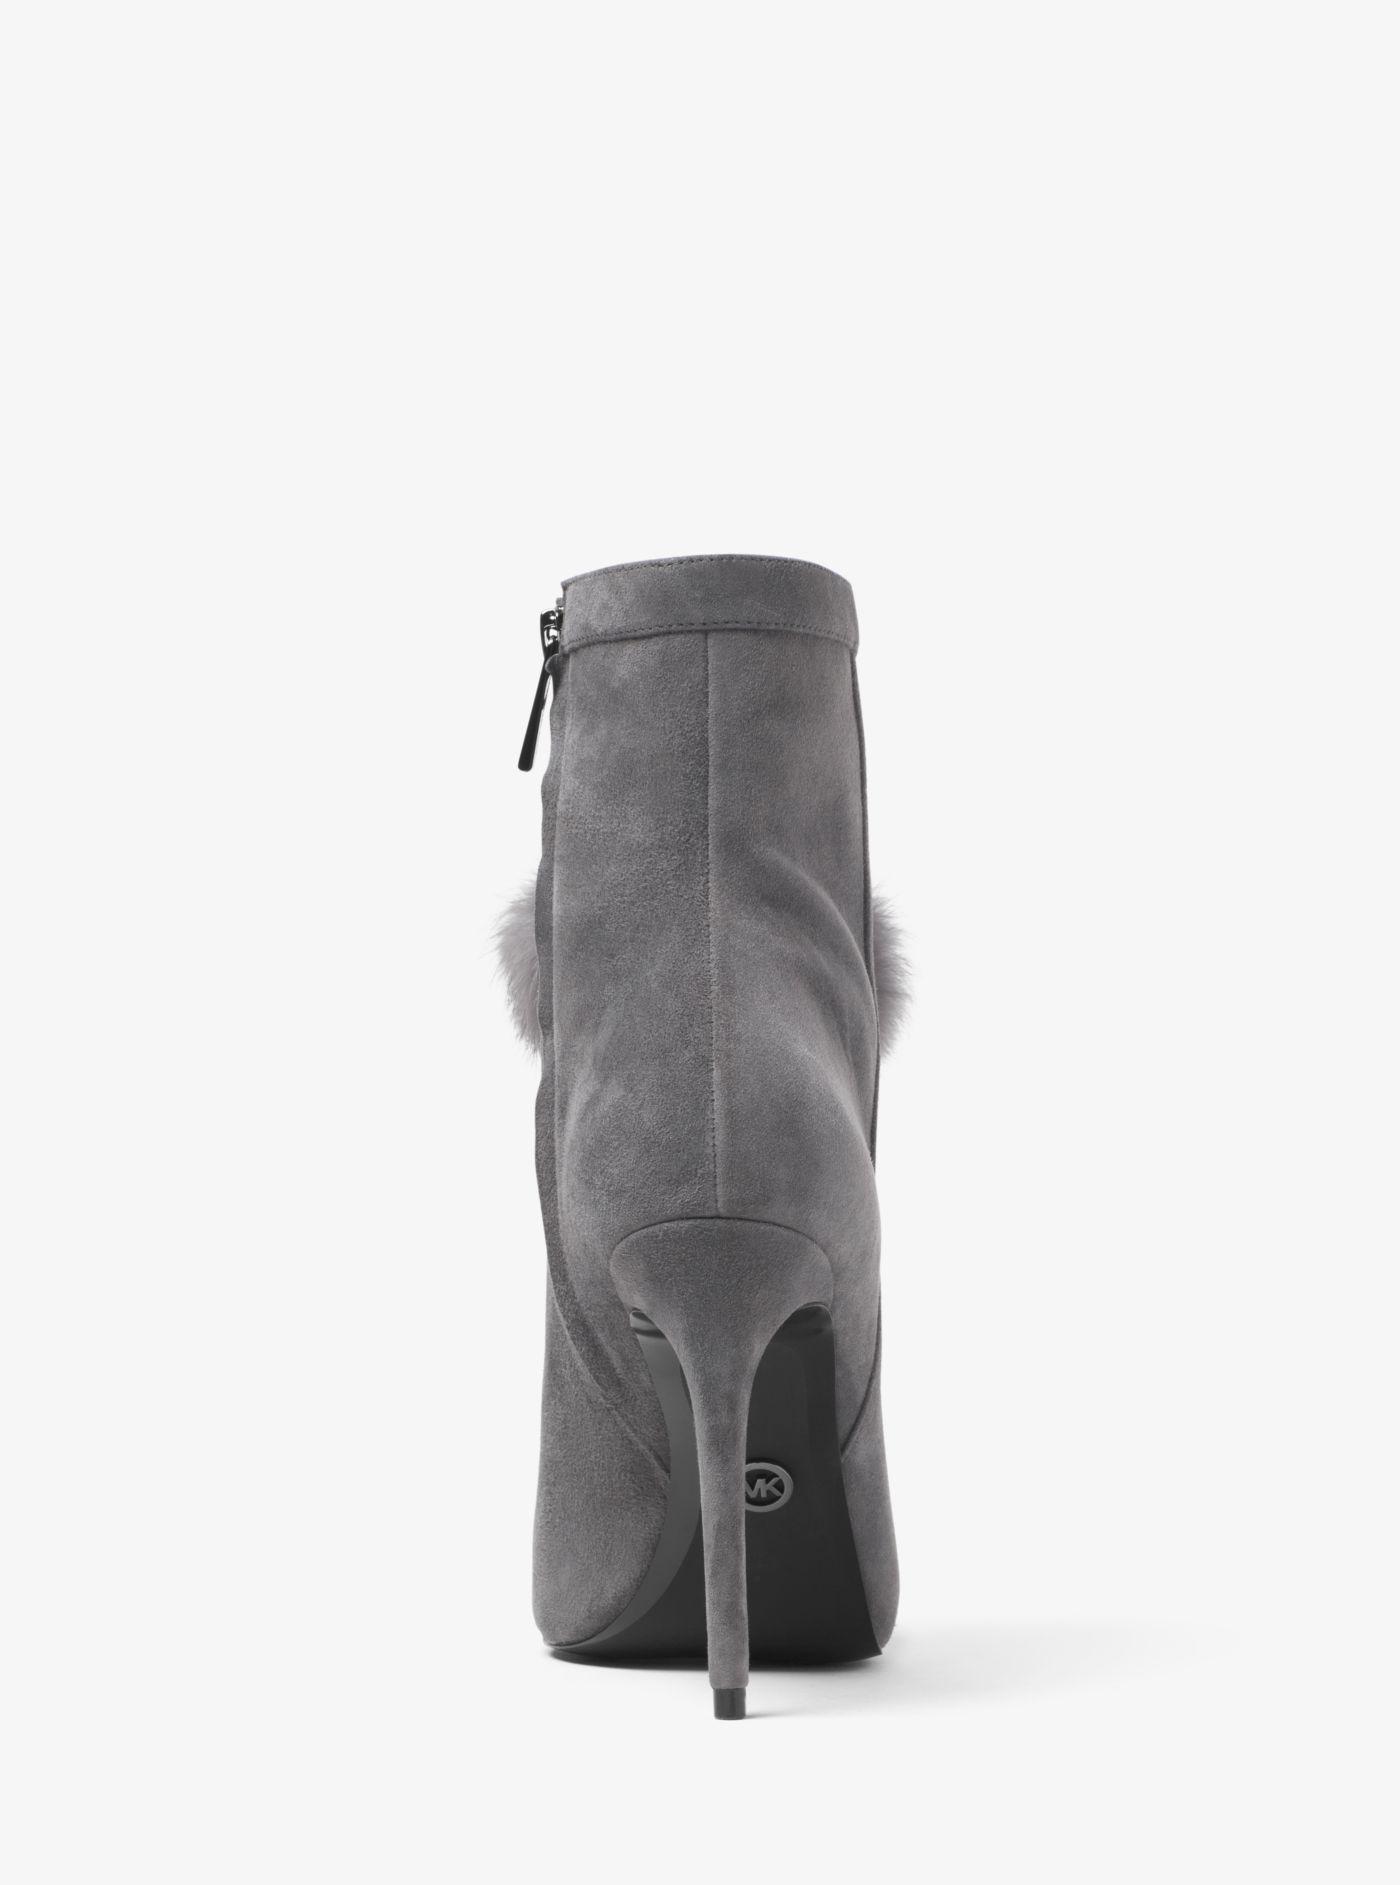 Michael Kors Remi Pom-pom Suede Ankle Boot in Gray - Lyst